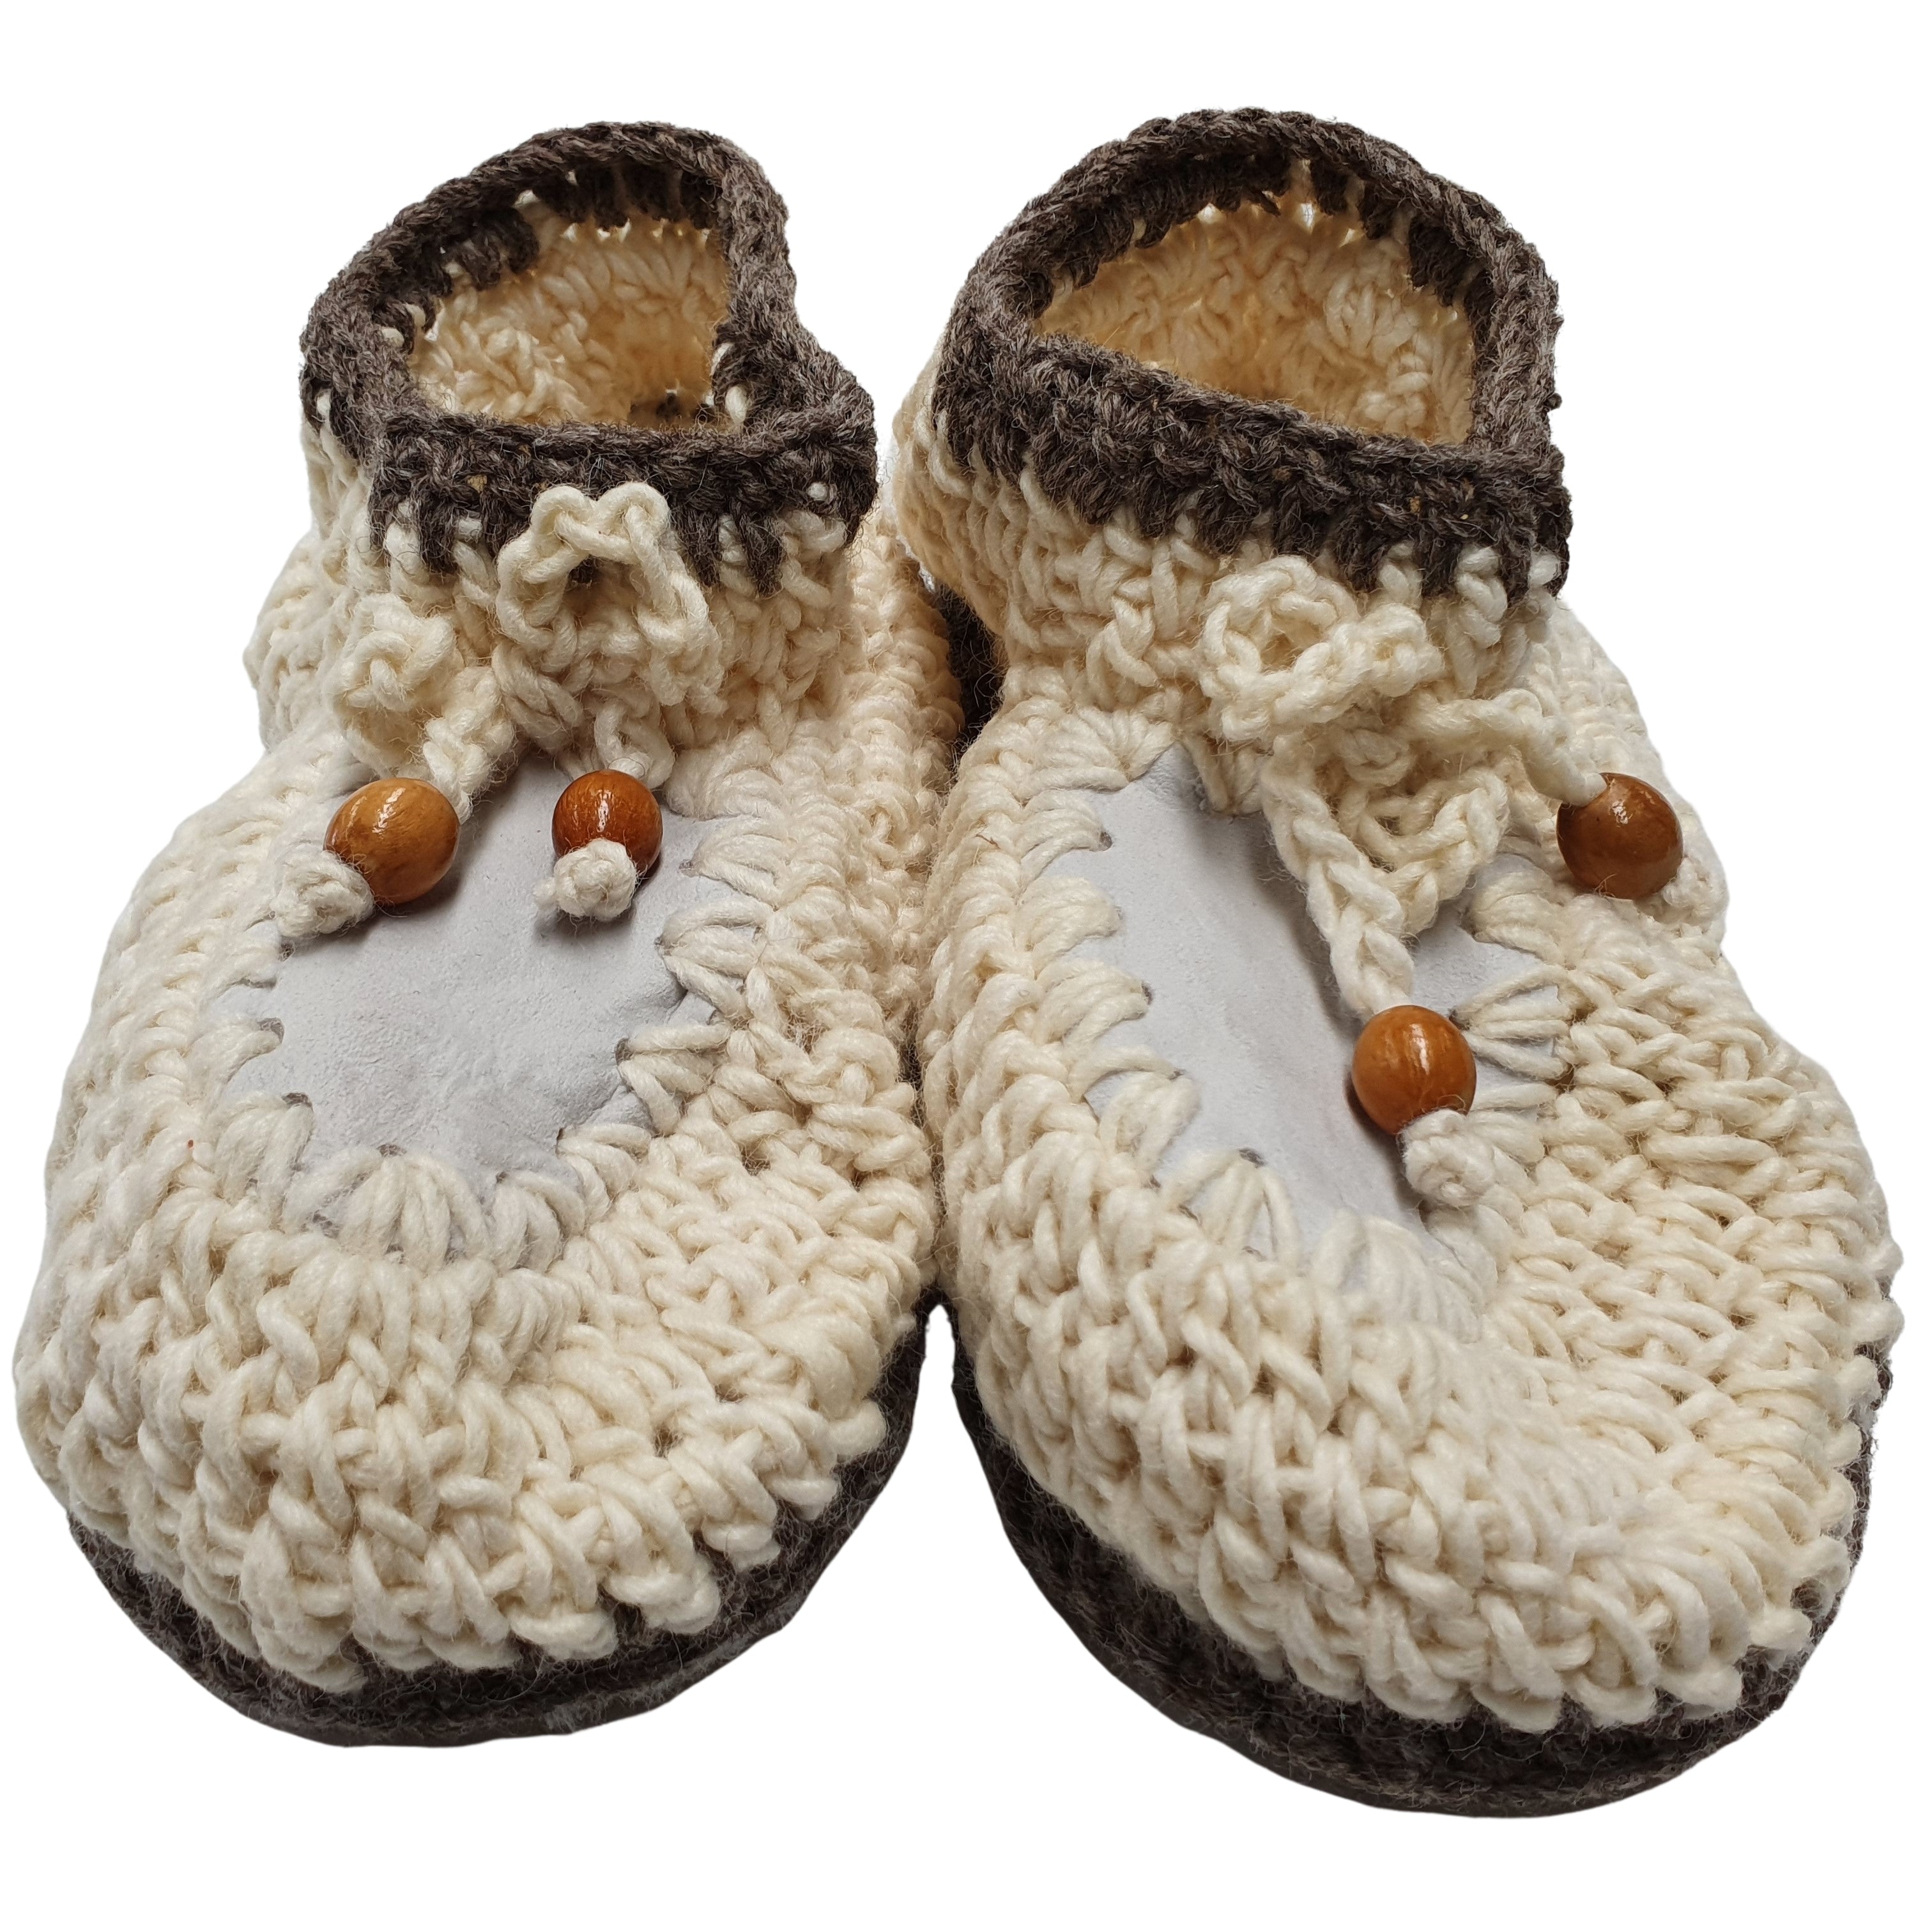 Crocheted Adult Slippers; NZ Wool.